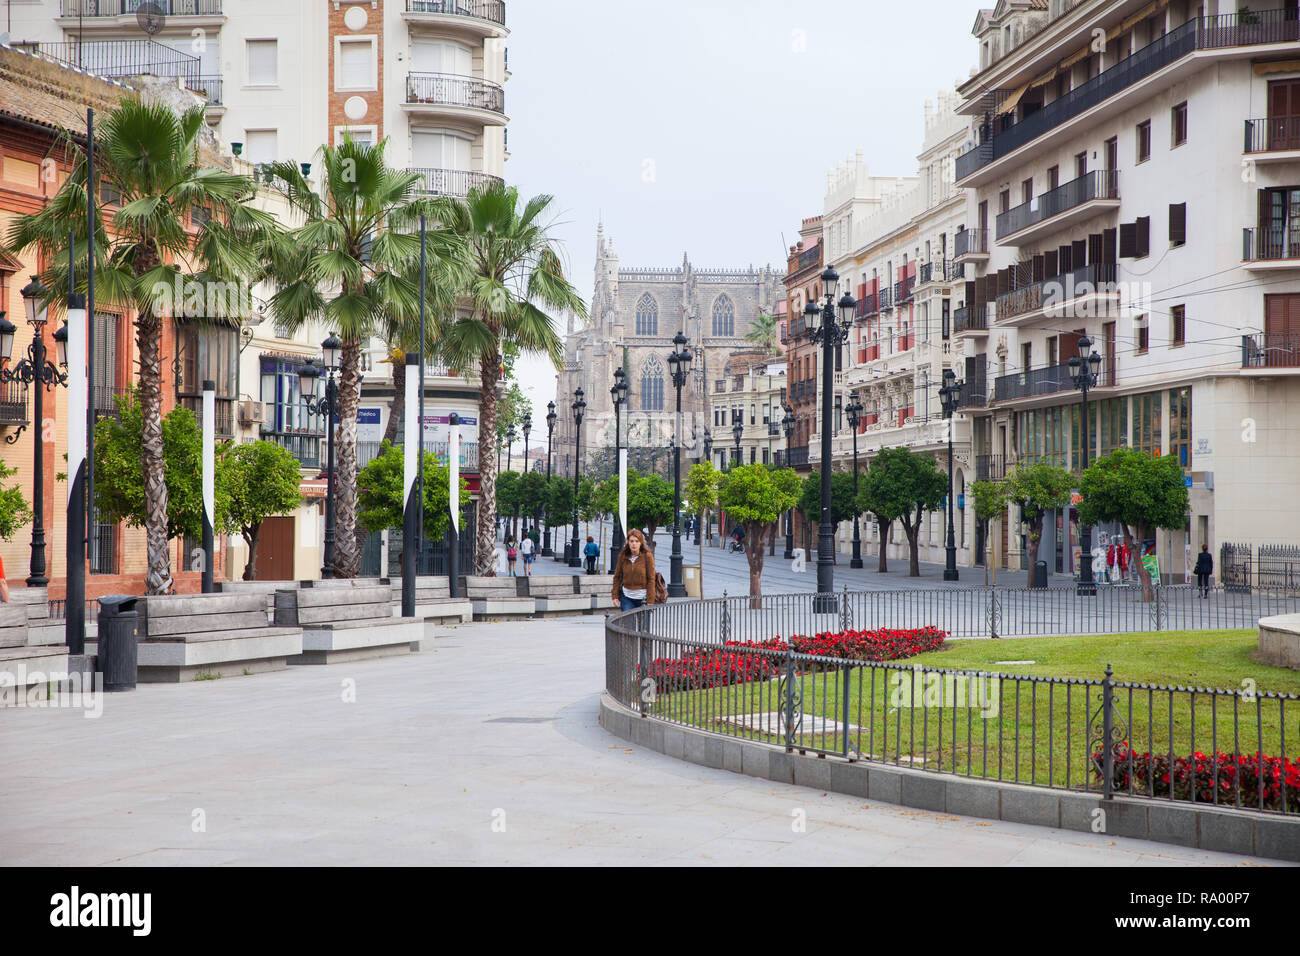 April 27, 2013 - Sevilla, Spain: Streets of Sevilla, near Hispalis Fountains; view to St. Constitution Street (Sevilla Cathedral at background). Stock Photo